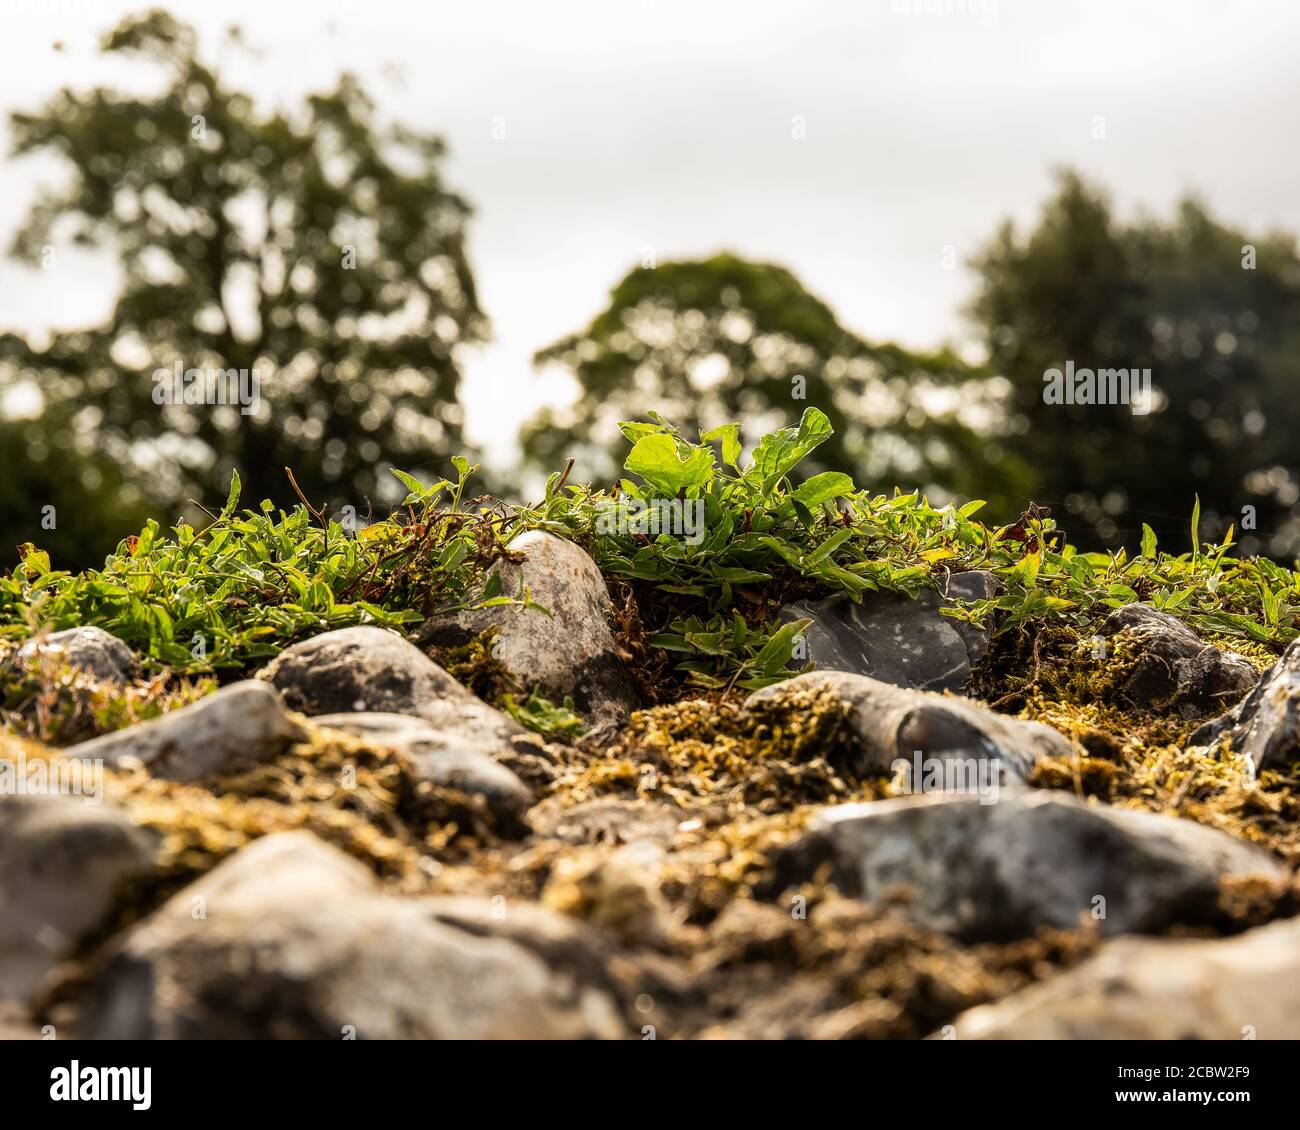 Selective focus Medieval flint stone wall ruins with multi color texture with background of distant trees Stock Photo